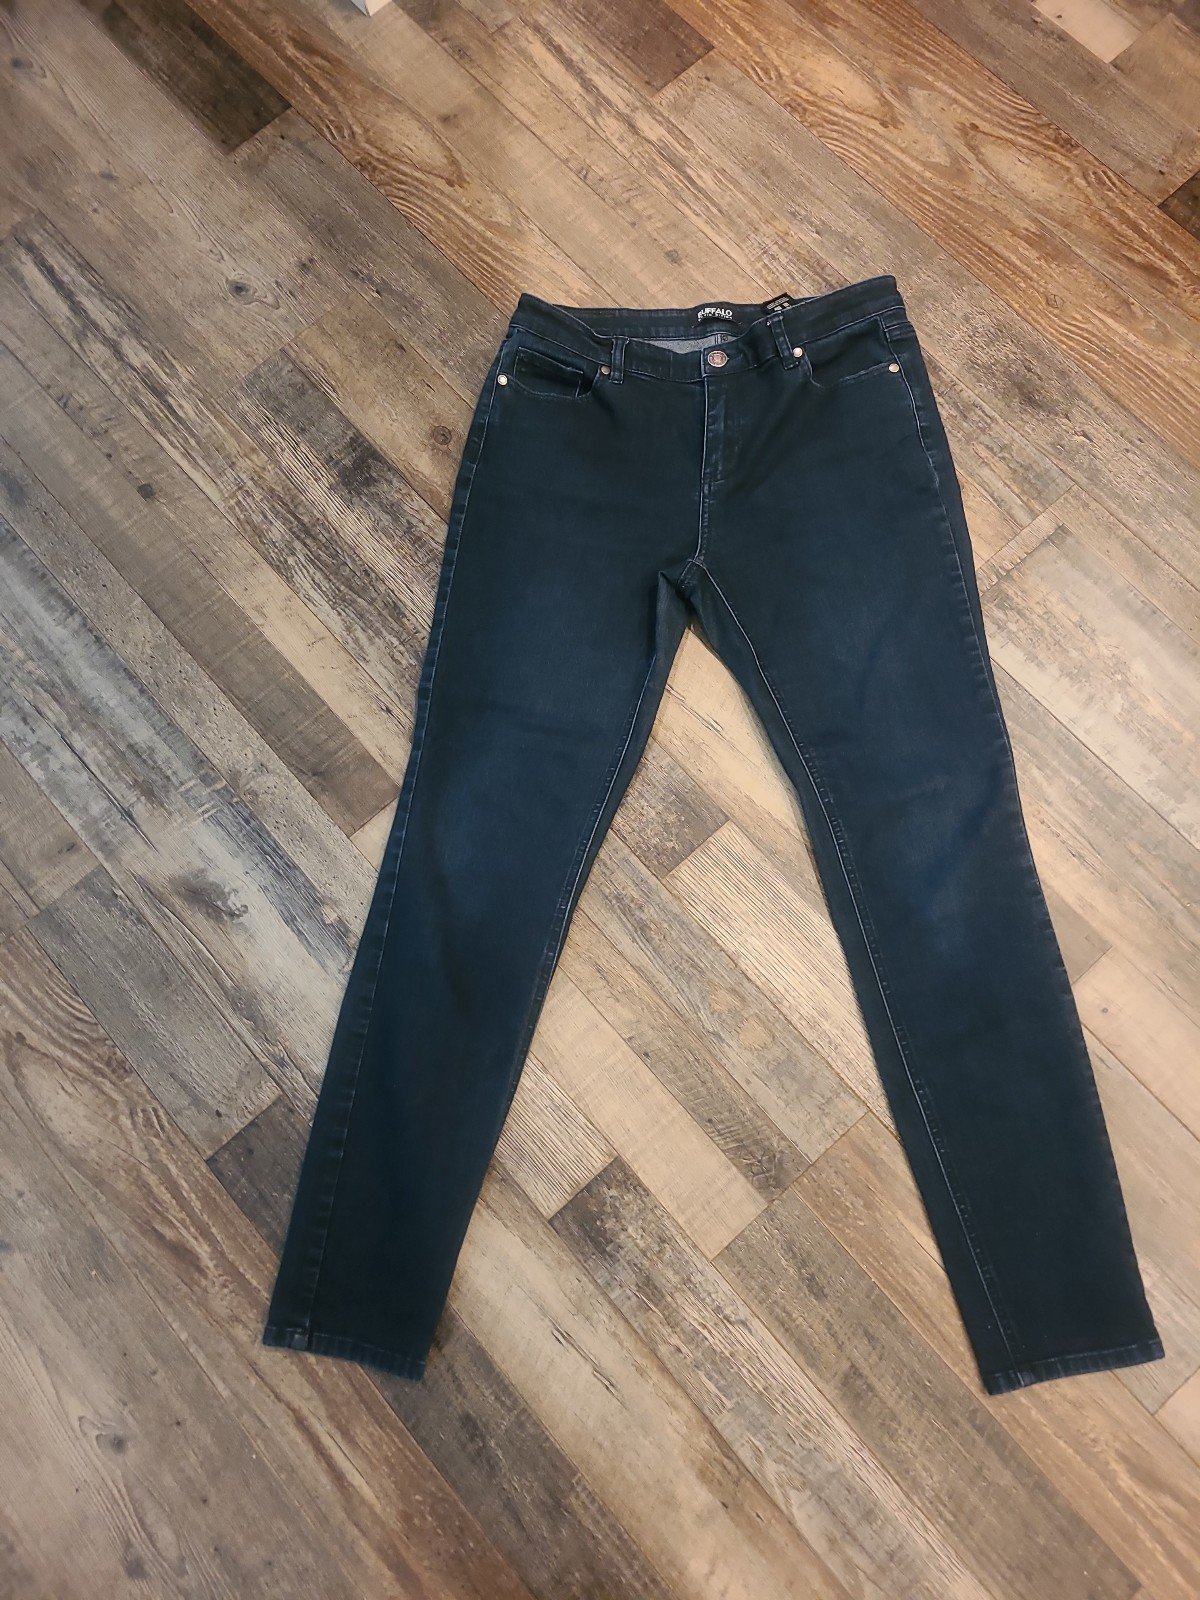 large discount Skinny Jeans HJokbUftI Outlet Store